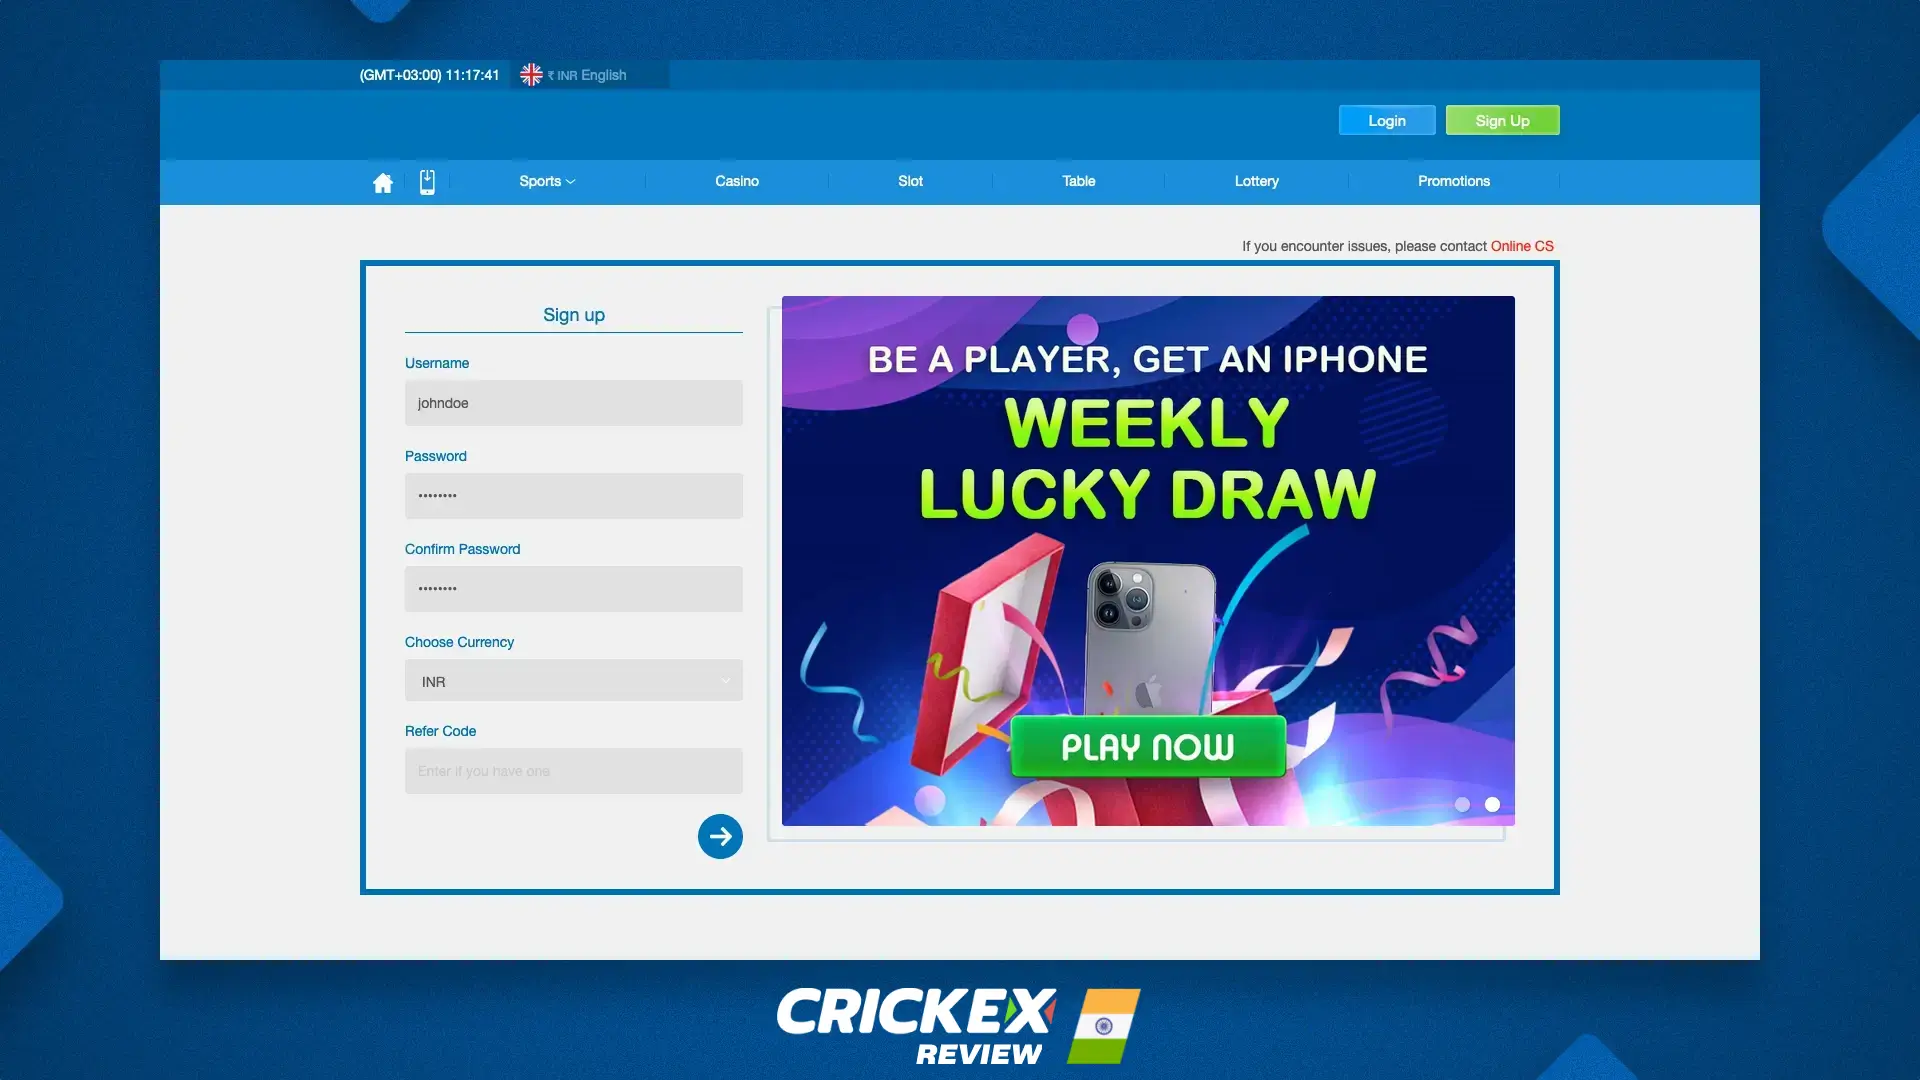 Registration form at Crickex website for new users